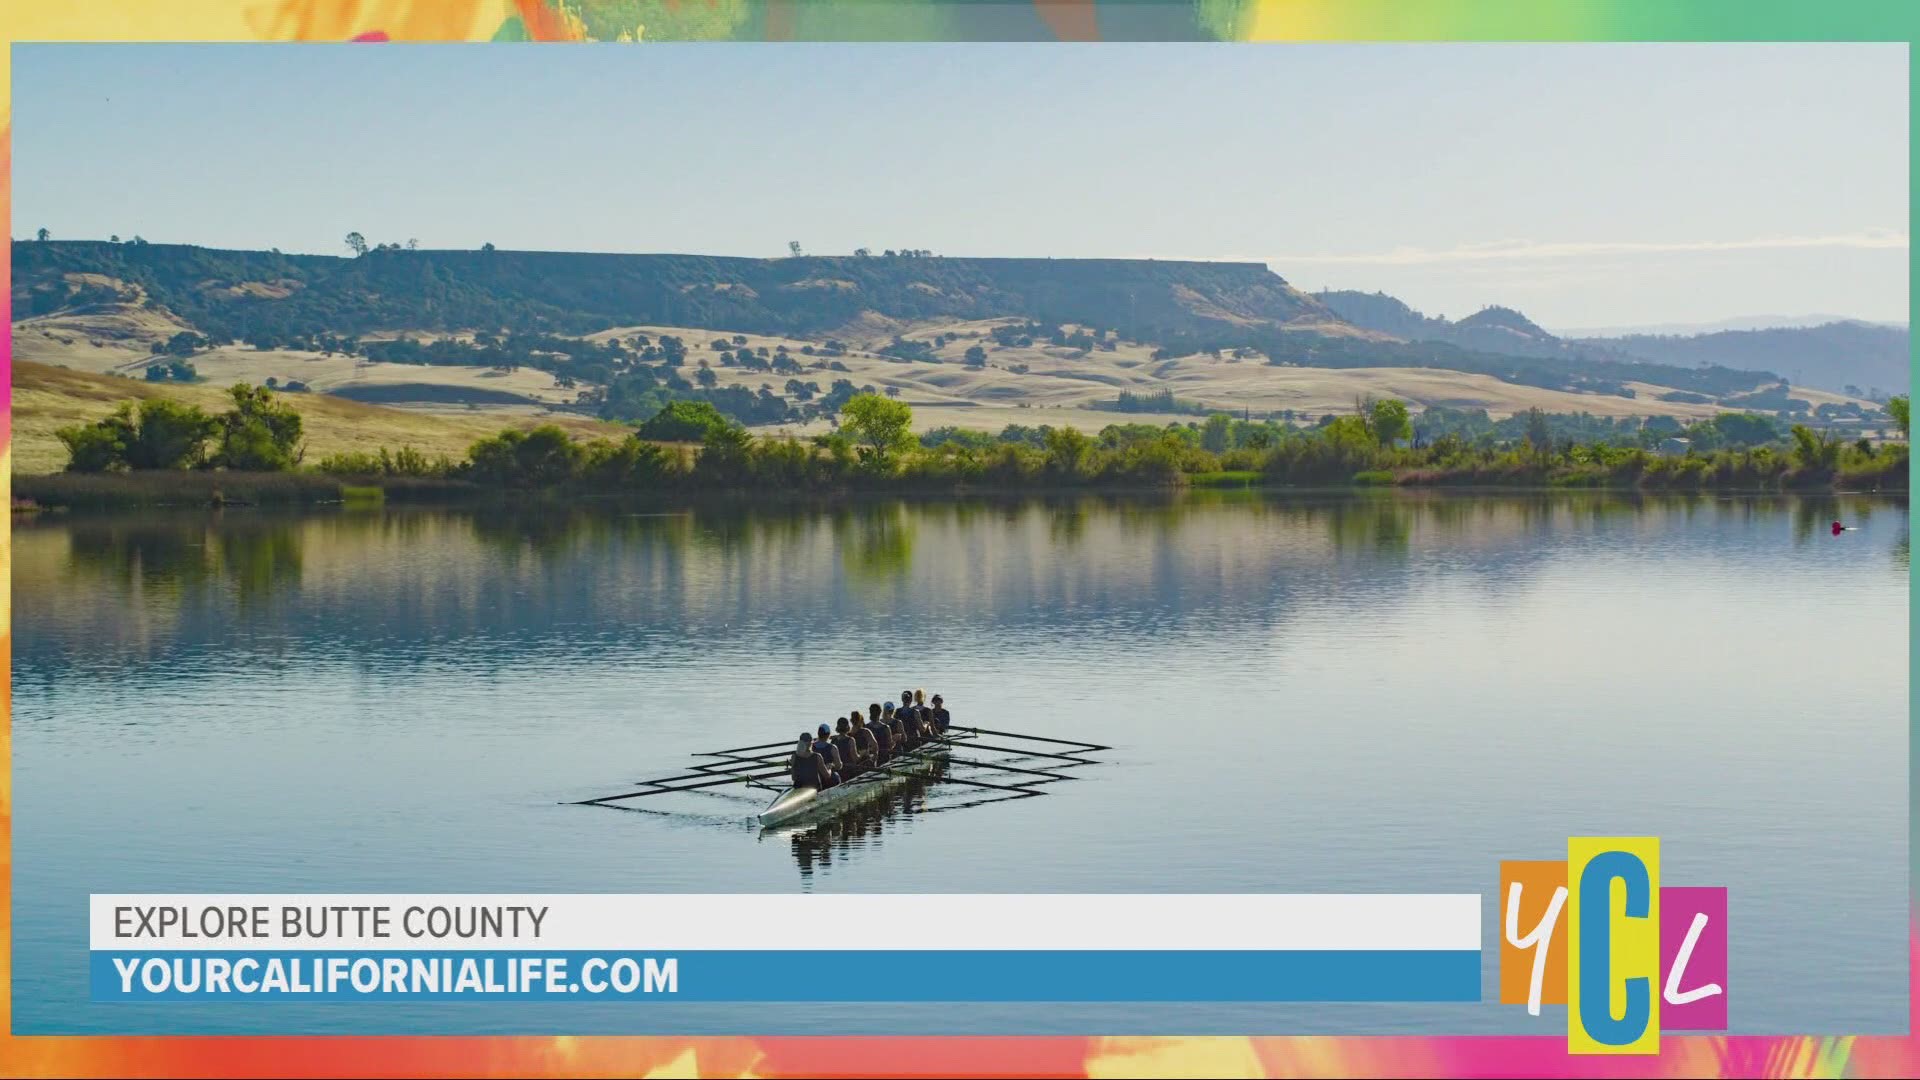 Explore Butte County Executive Director Carolyn Denero shares some hidden gems right here in Northern California to enjoy on a hot summer day.